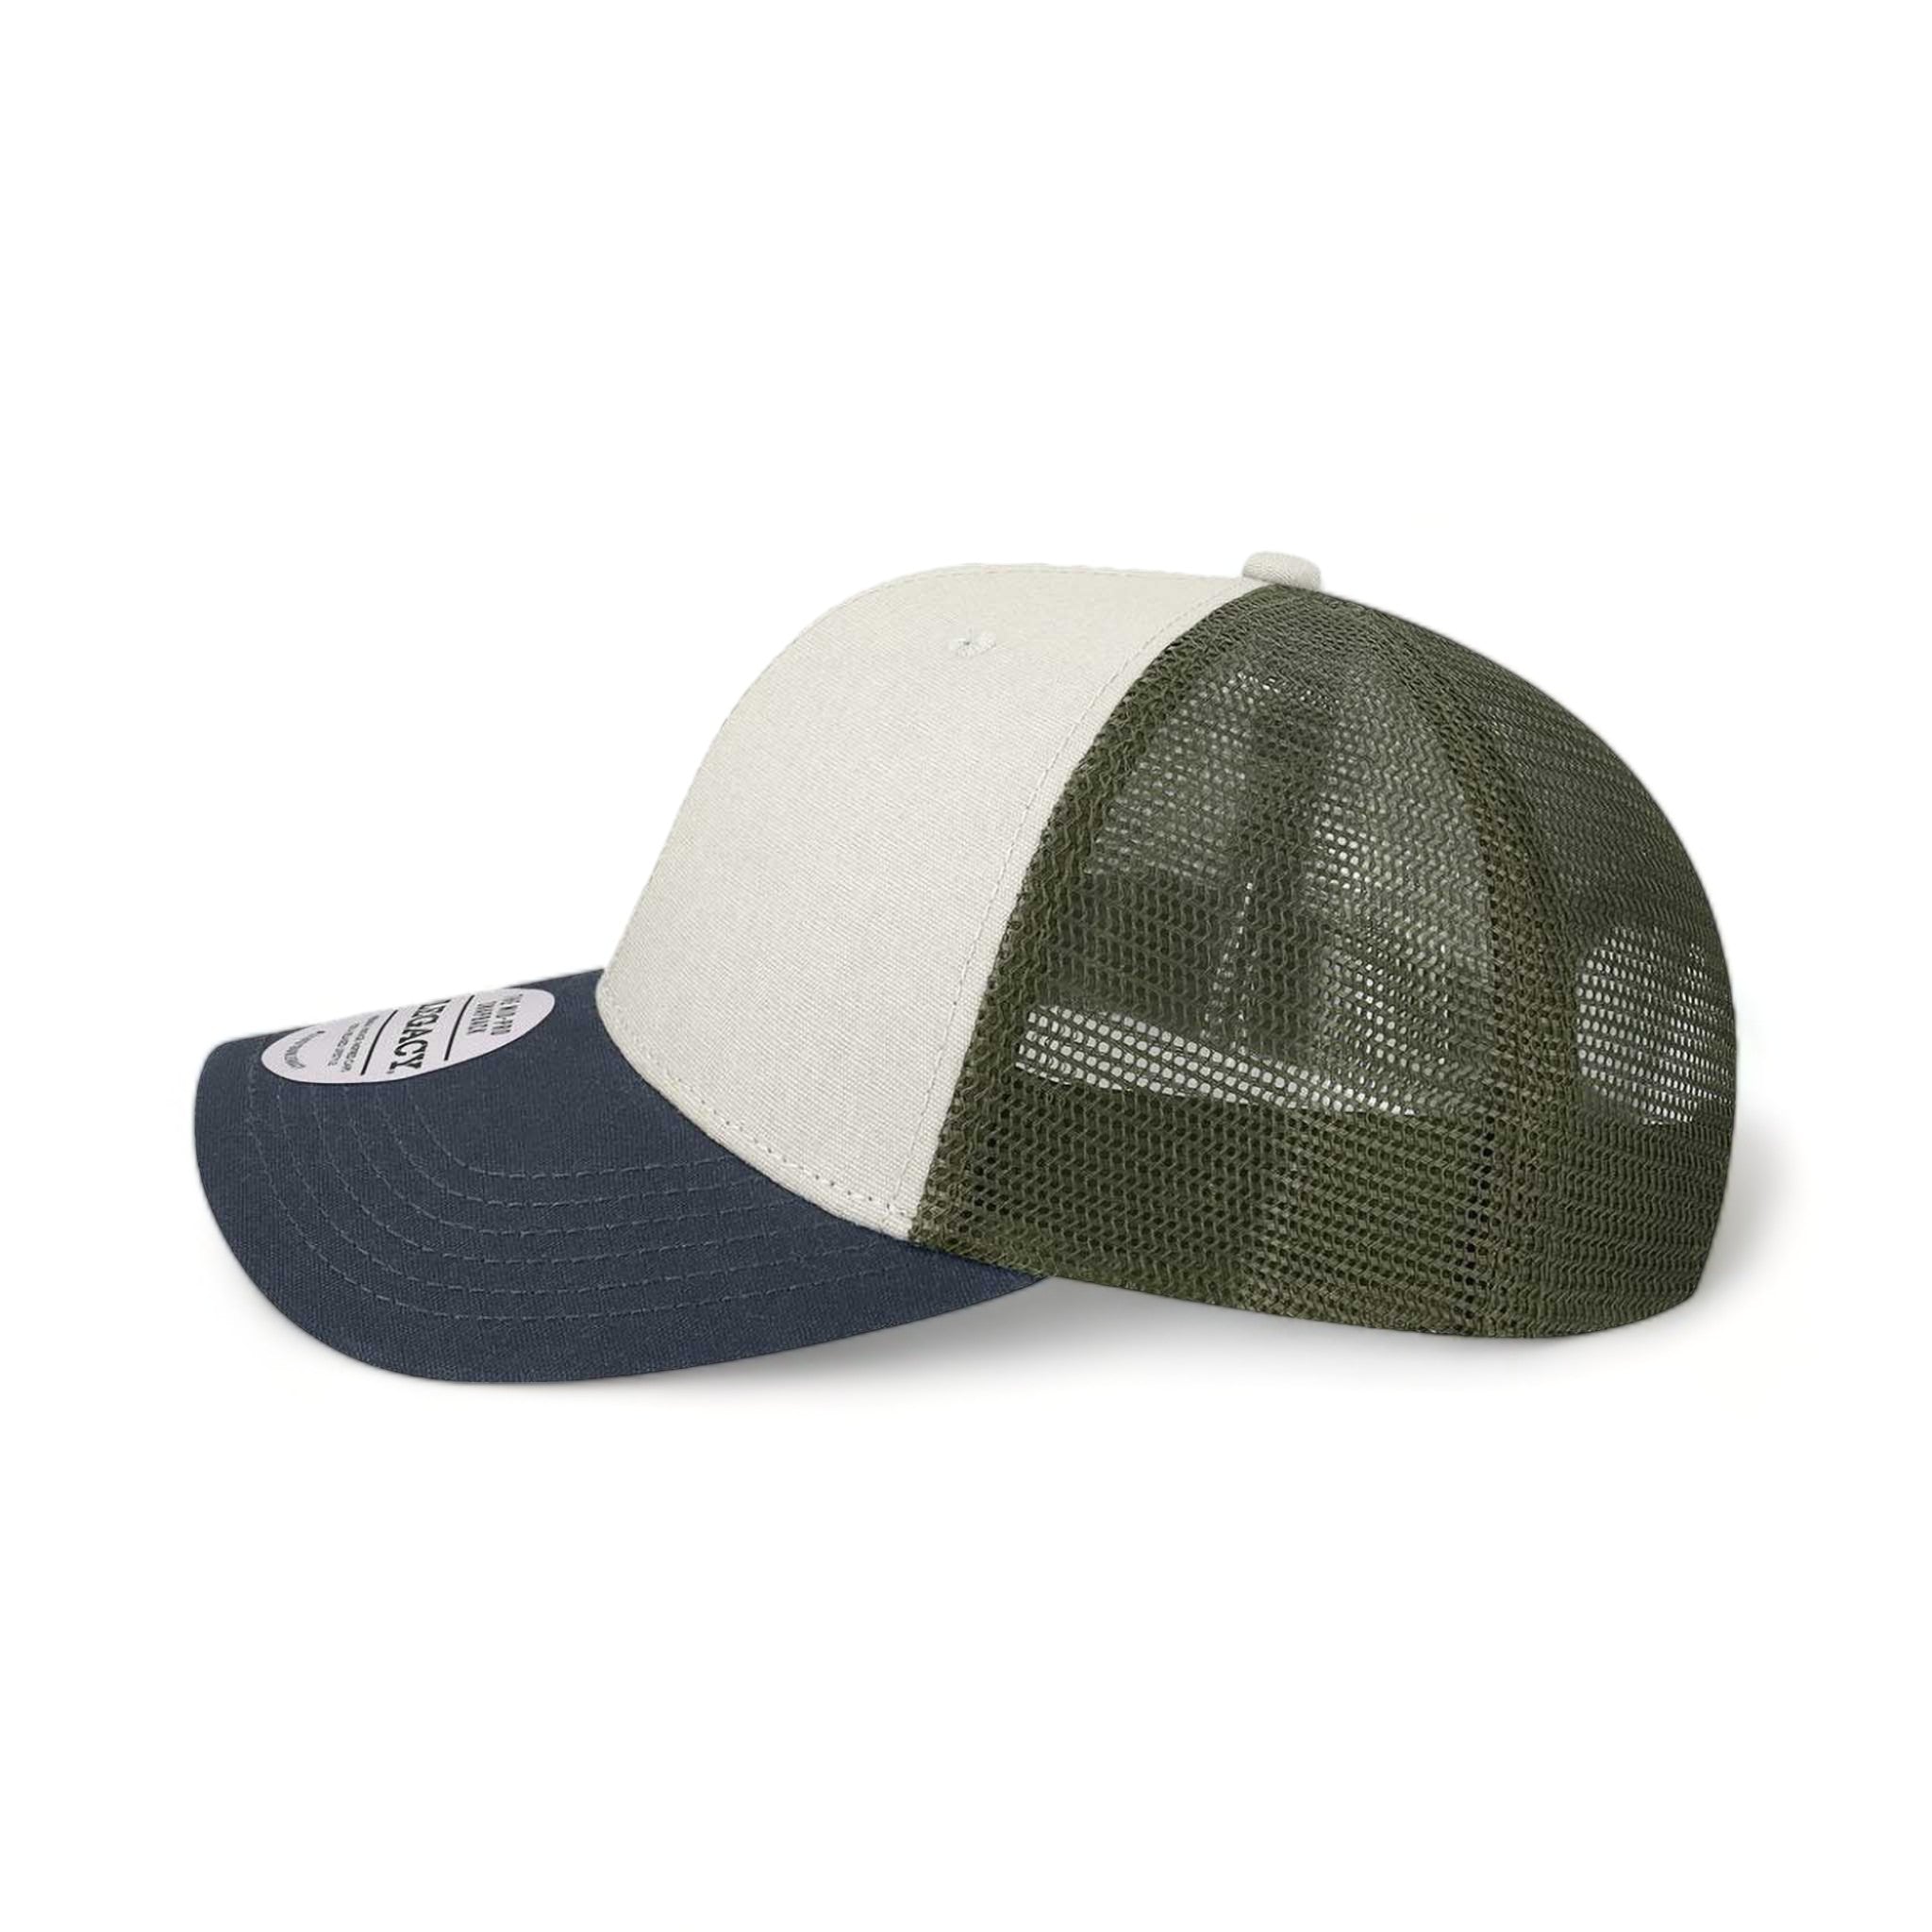 Side view of LEGACY MPS custom hat in tan, navy and olive green